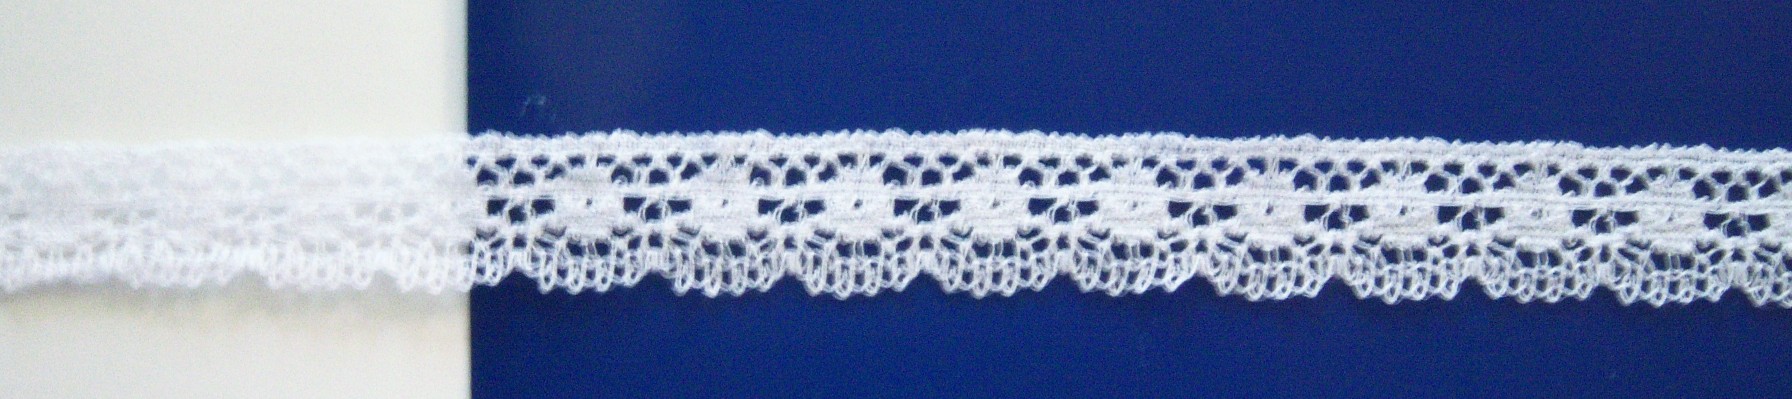 White 3/4" Cluny Lace